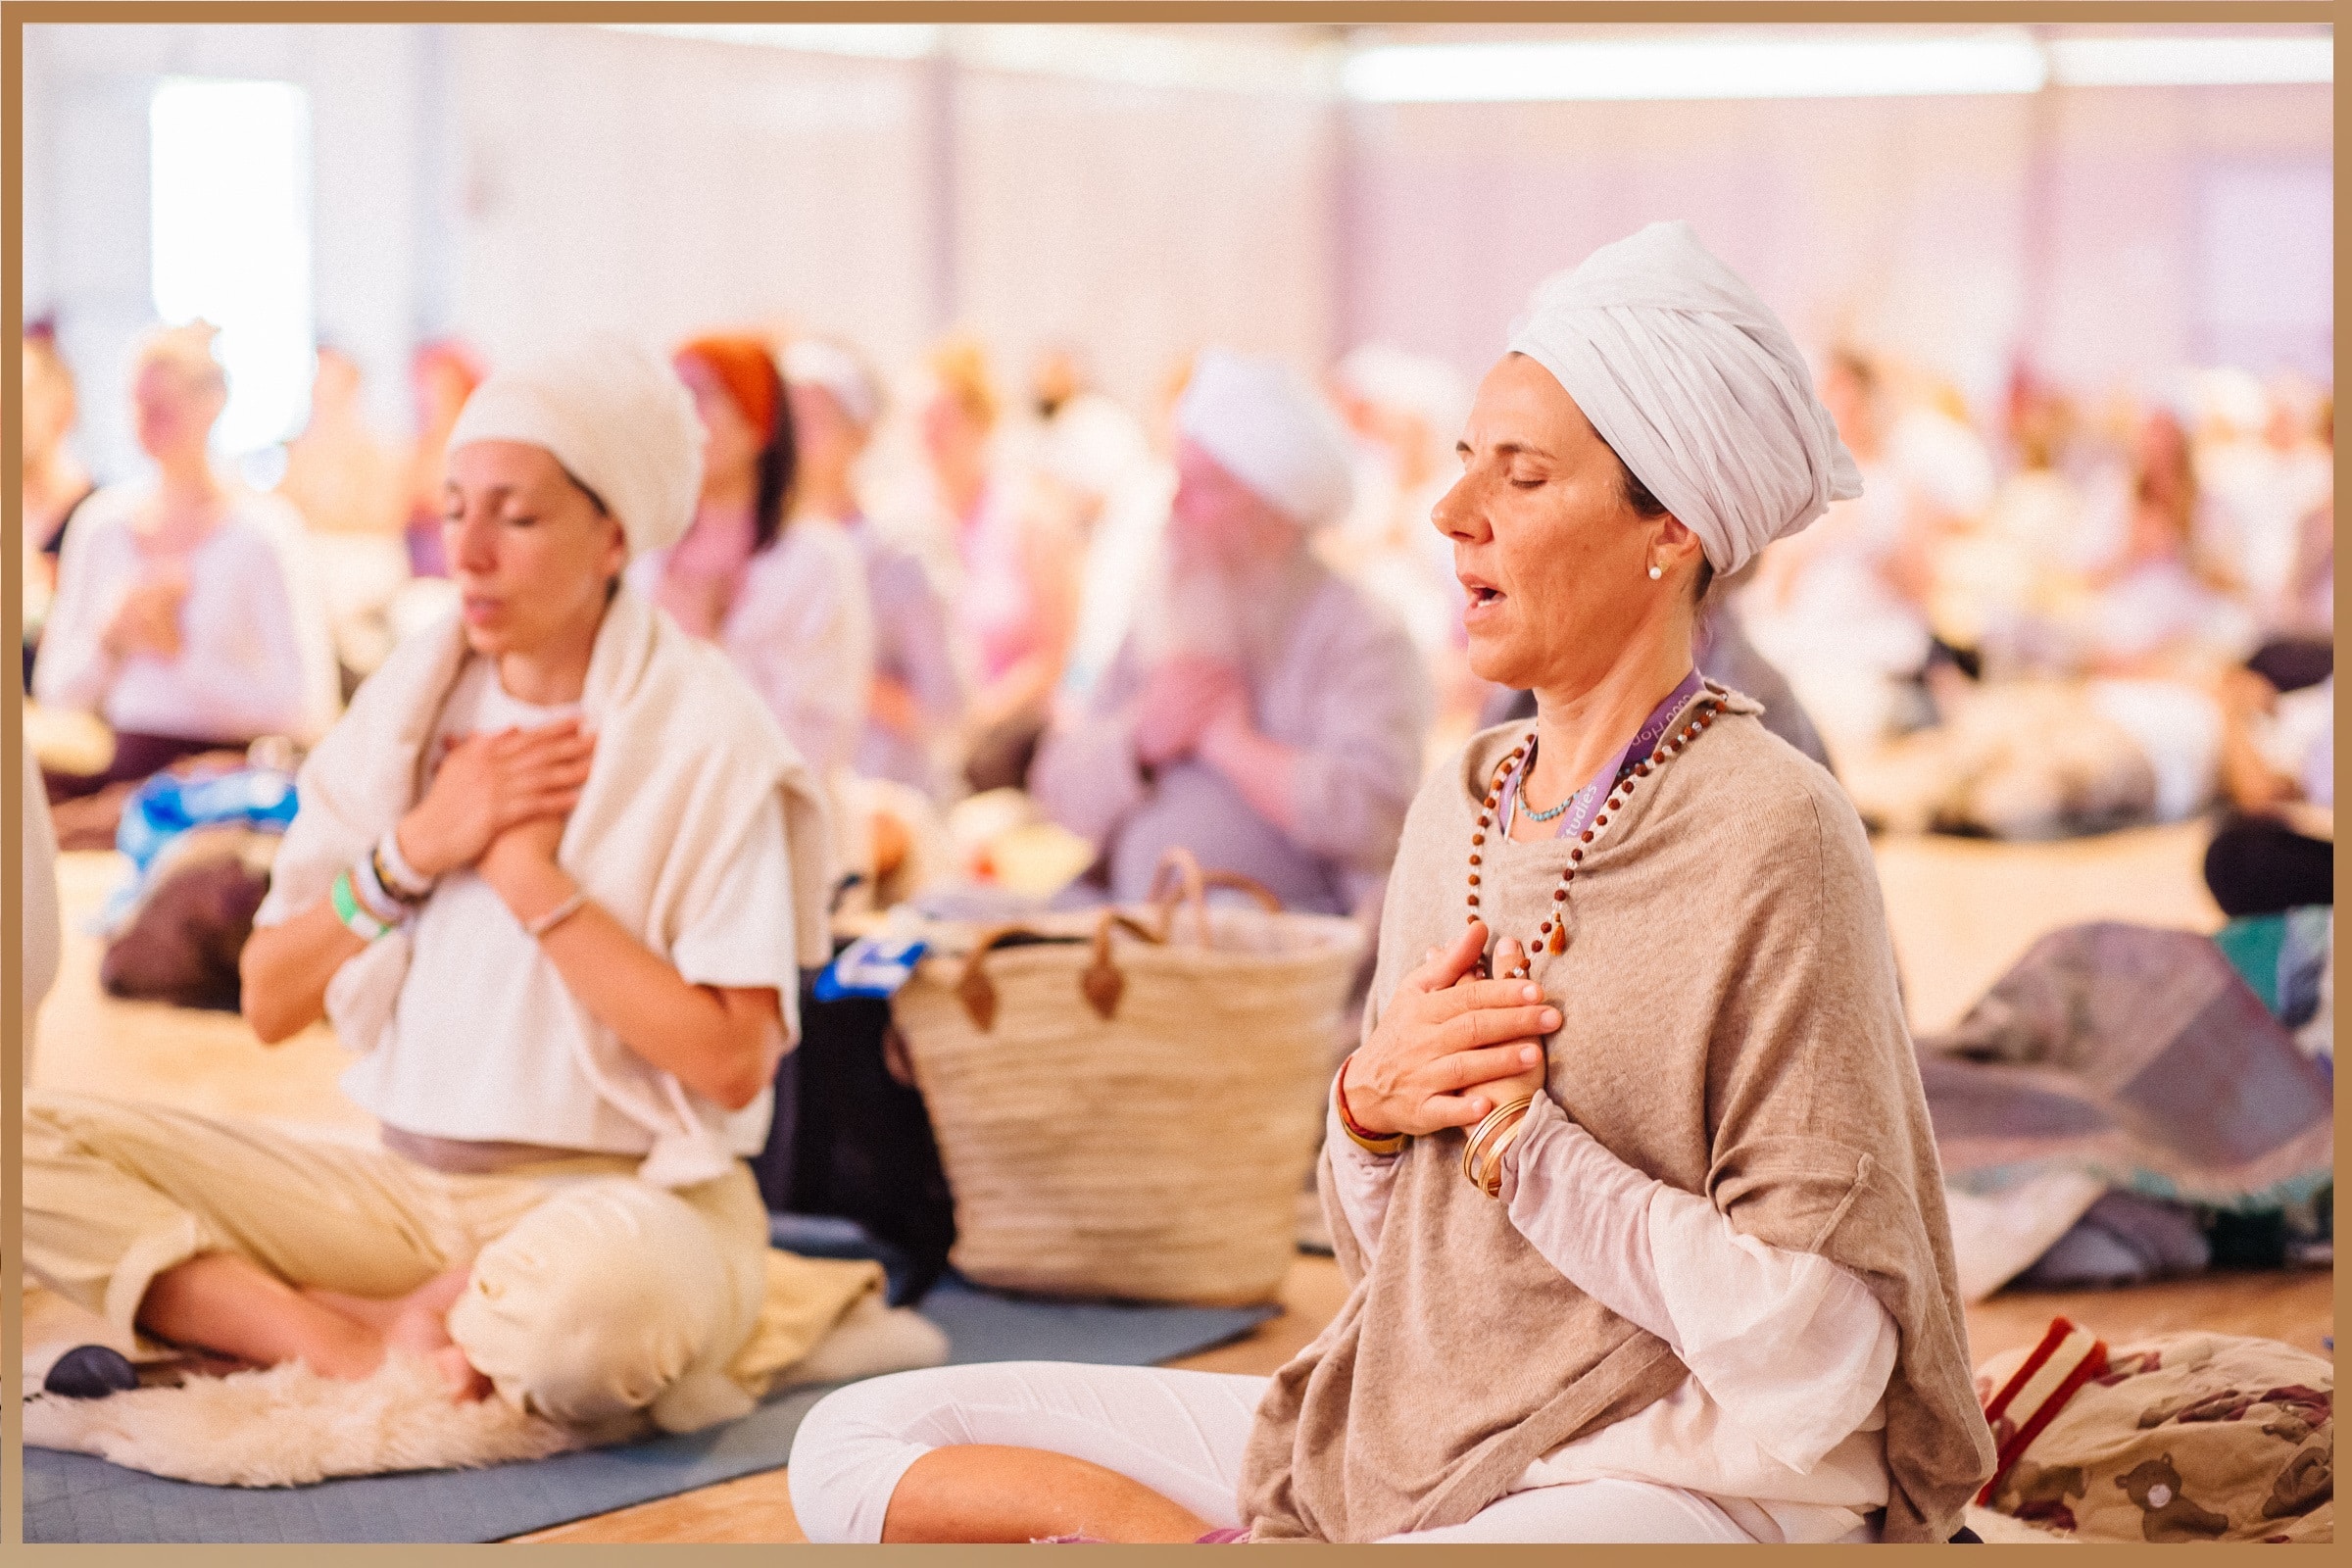 Participants in a meditative Kundalini yoga session at the European Yoga Festival in France, wearing traditional white clothing to enhance spiritual and mental focus.